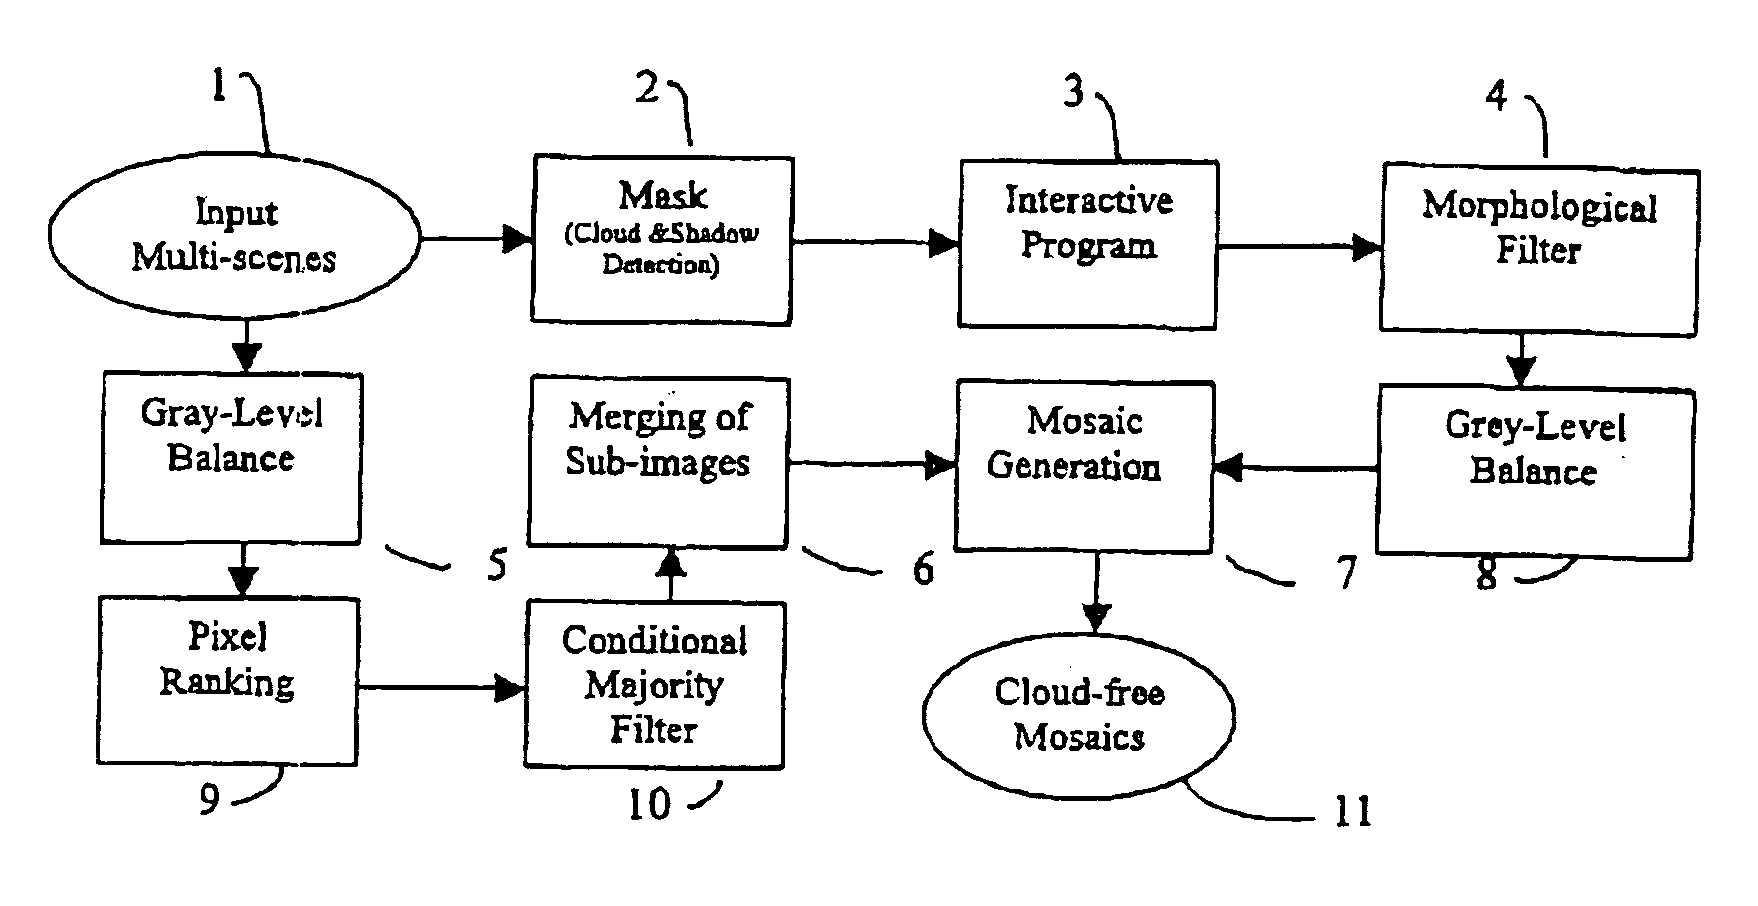 Method for producing cloud free and cloud-shadow free images